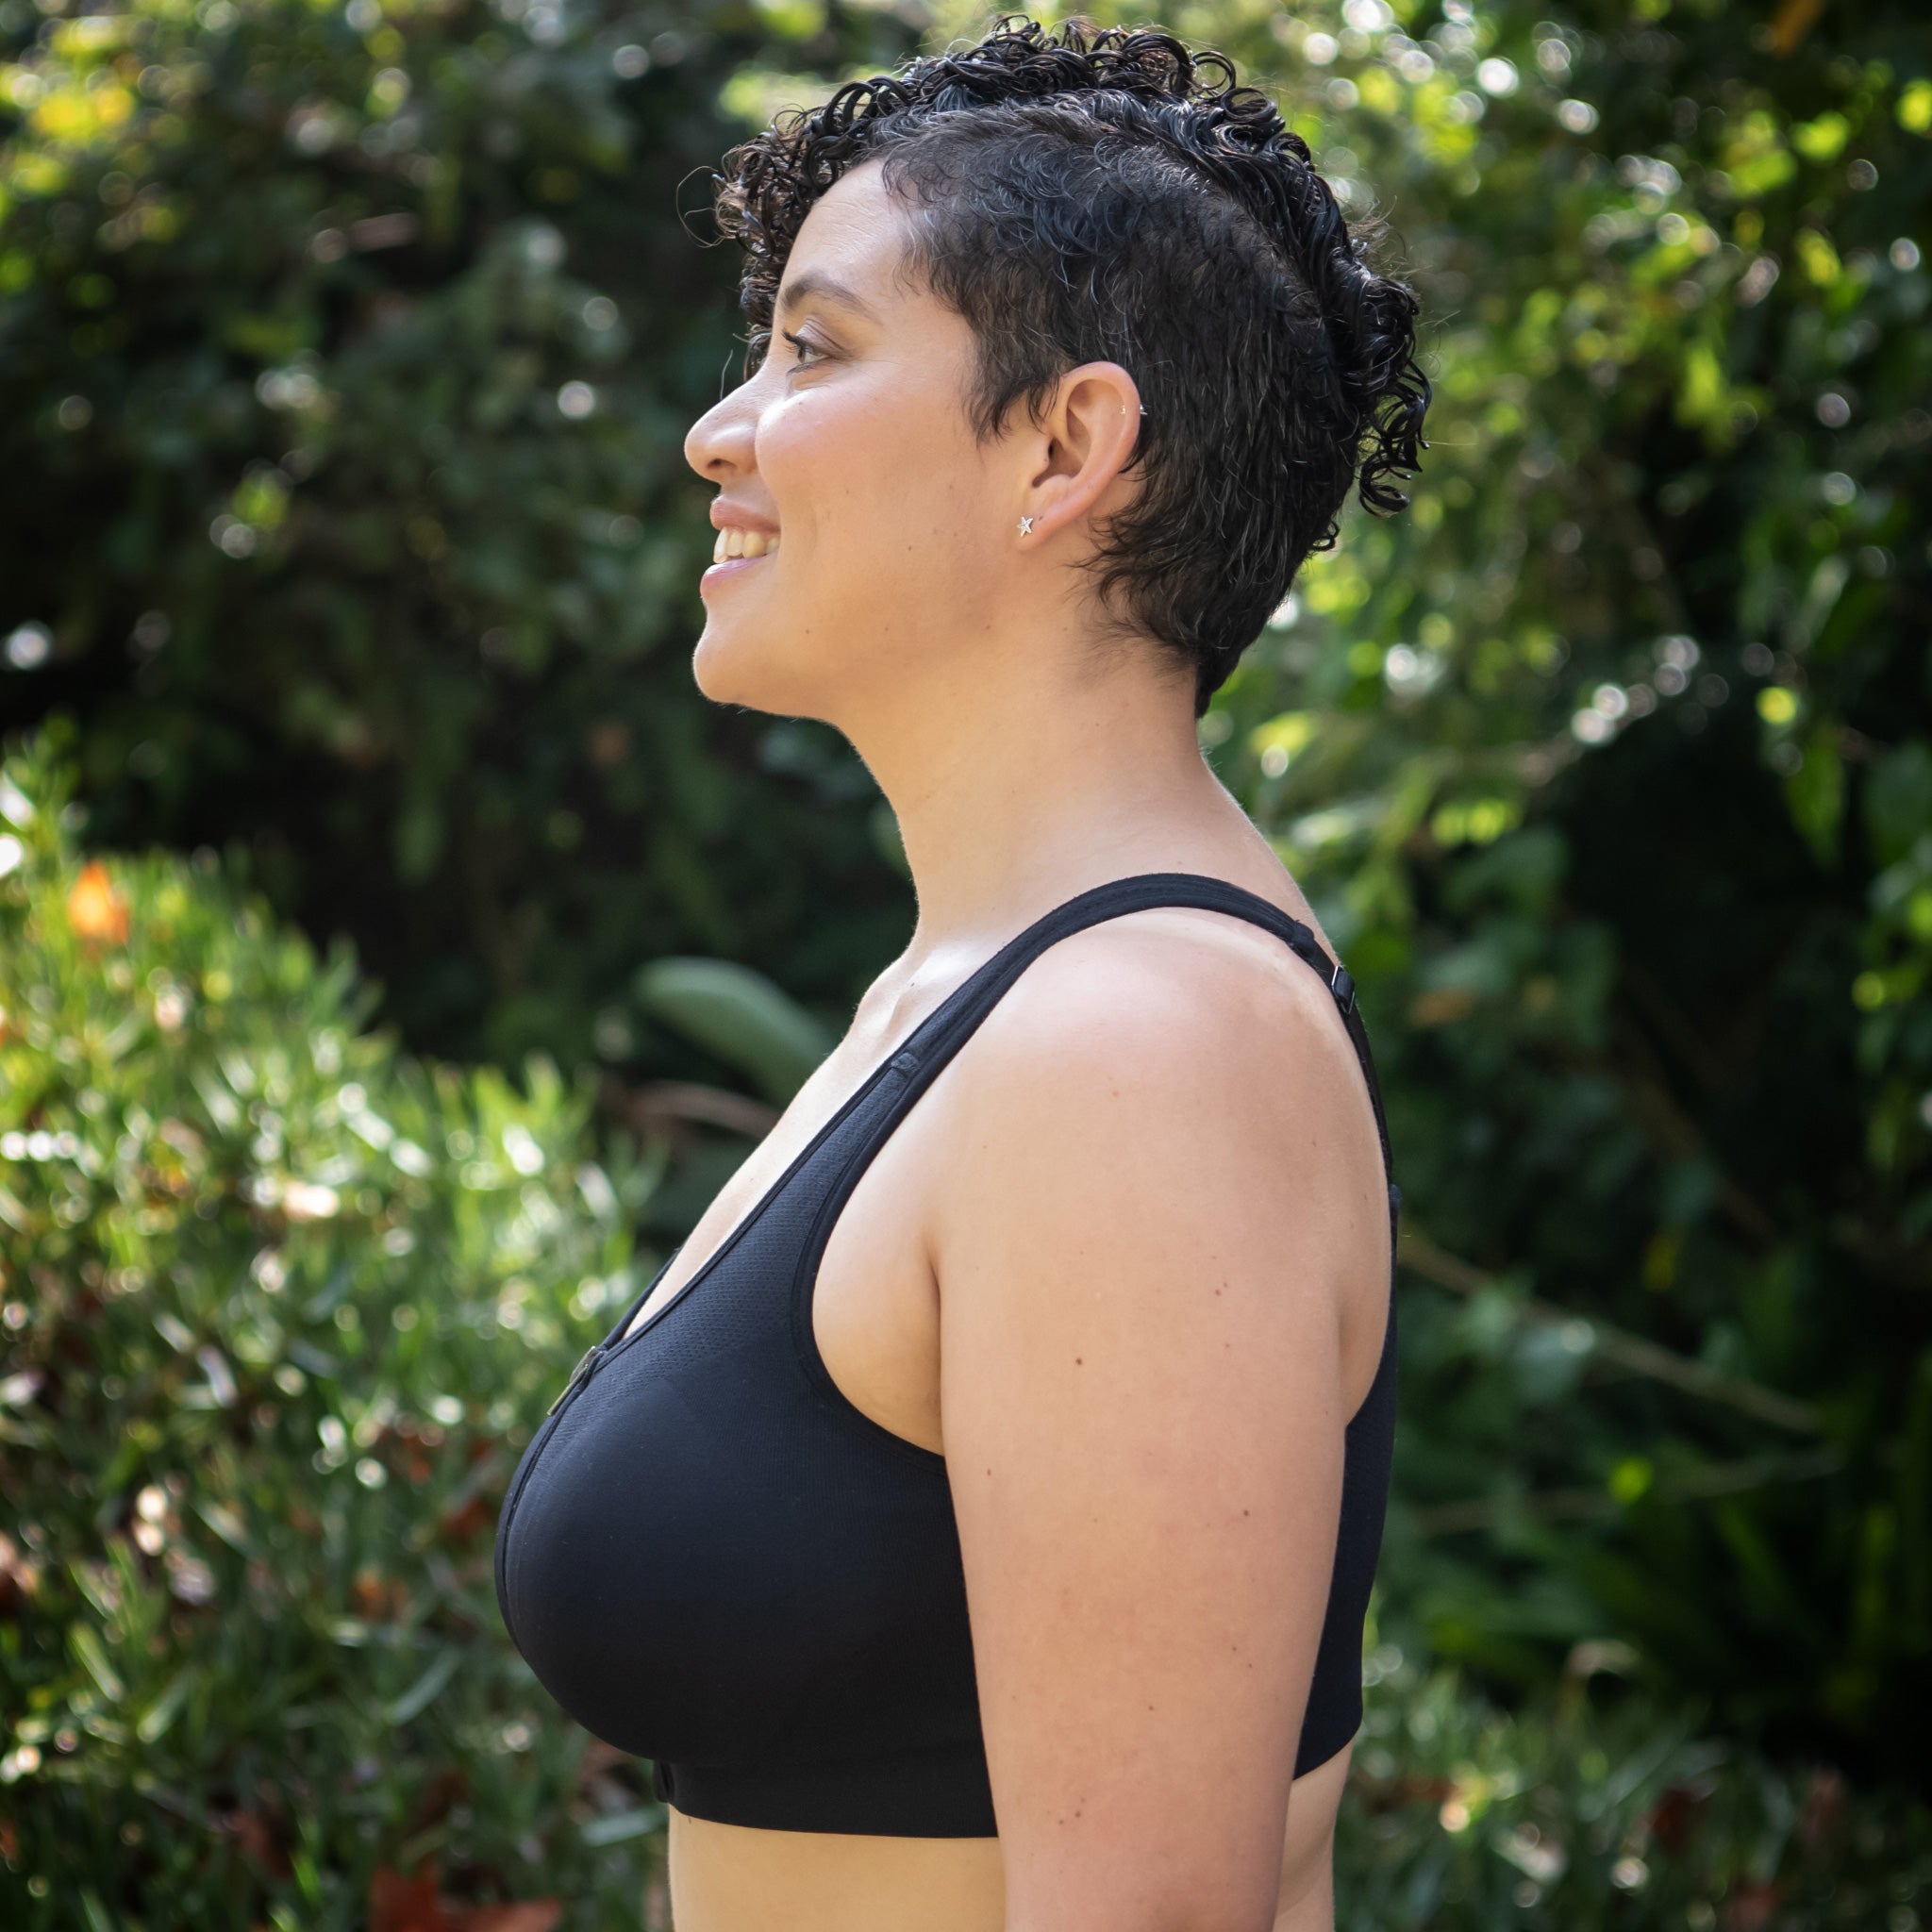 HuggerVIDA | Body friendly bra for post-surgical, lymphedema & everyday  wear, medium to low compression